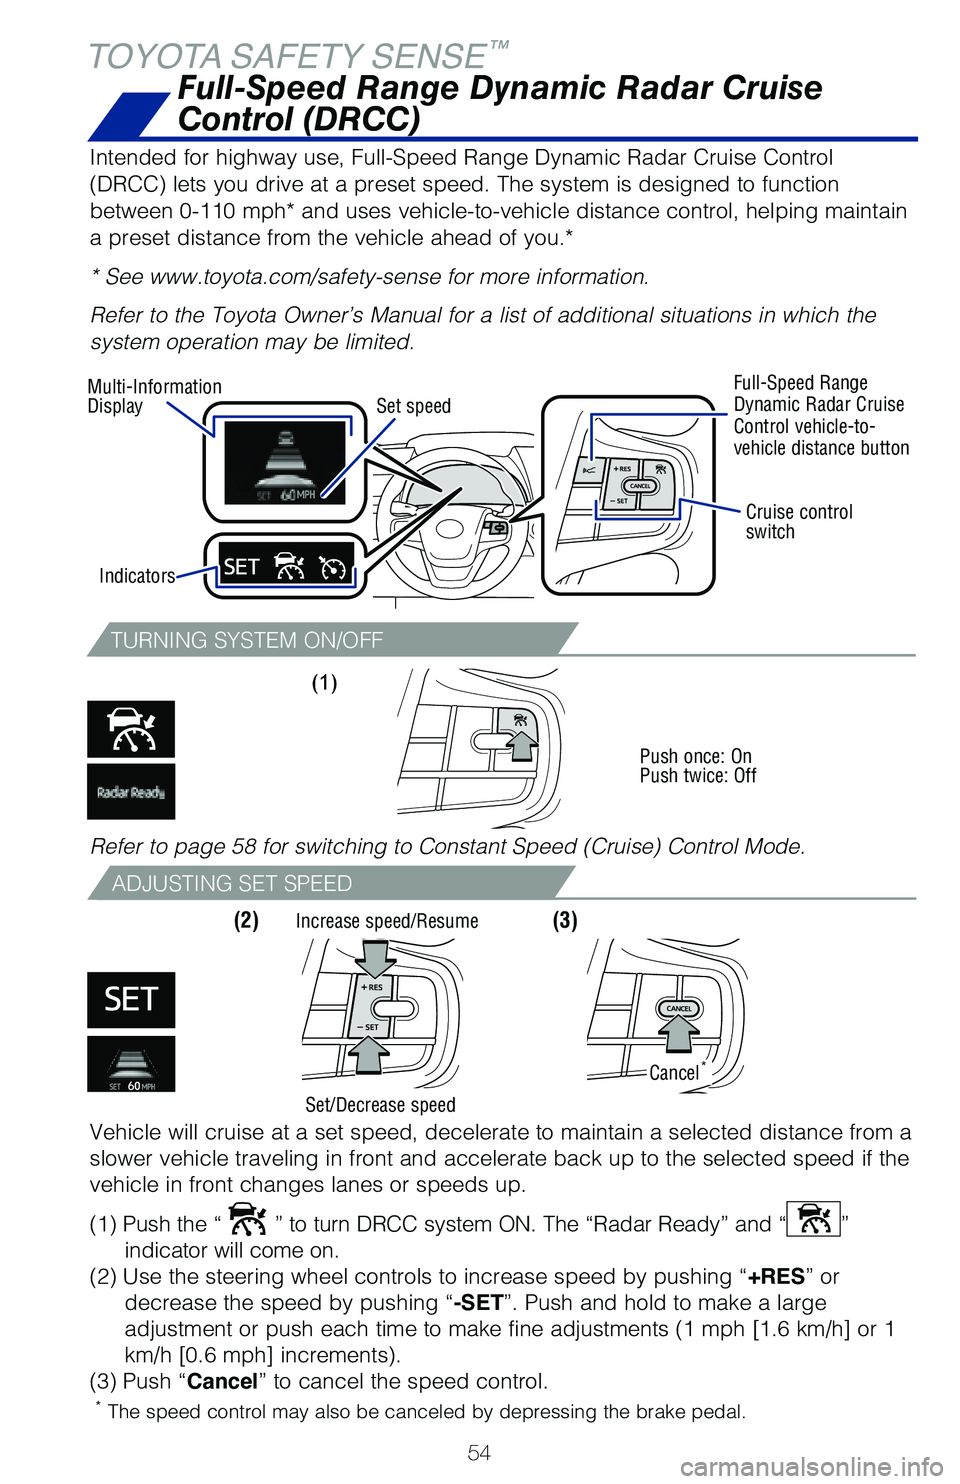 TOYOTA MIRAI 2021  Owners Manual (in English) 54
TURNING SYSTEM ON/OFF
ADJUSTING SET SPEED
(1) 
Push once: On
Push twice: Off
(2) (3) 
TOYOTA SAFETY SENSE™
Intended for highway use, Full-Speed Range Dynamic Radar Cruise Control \
(DRCC) lets y